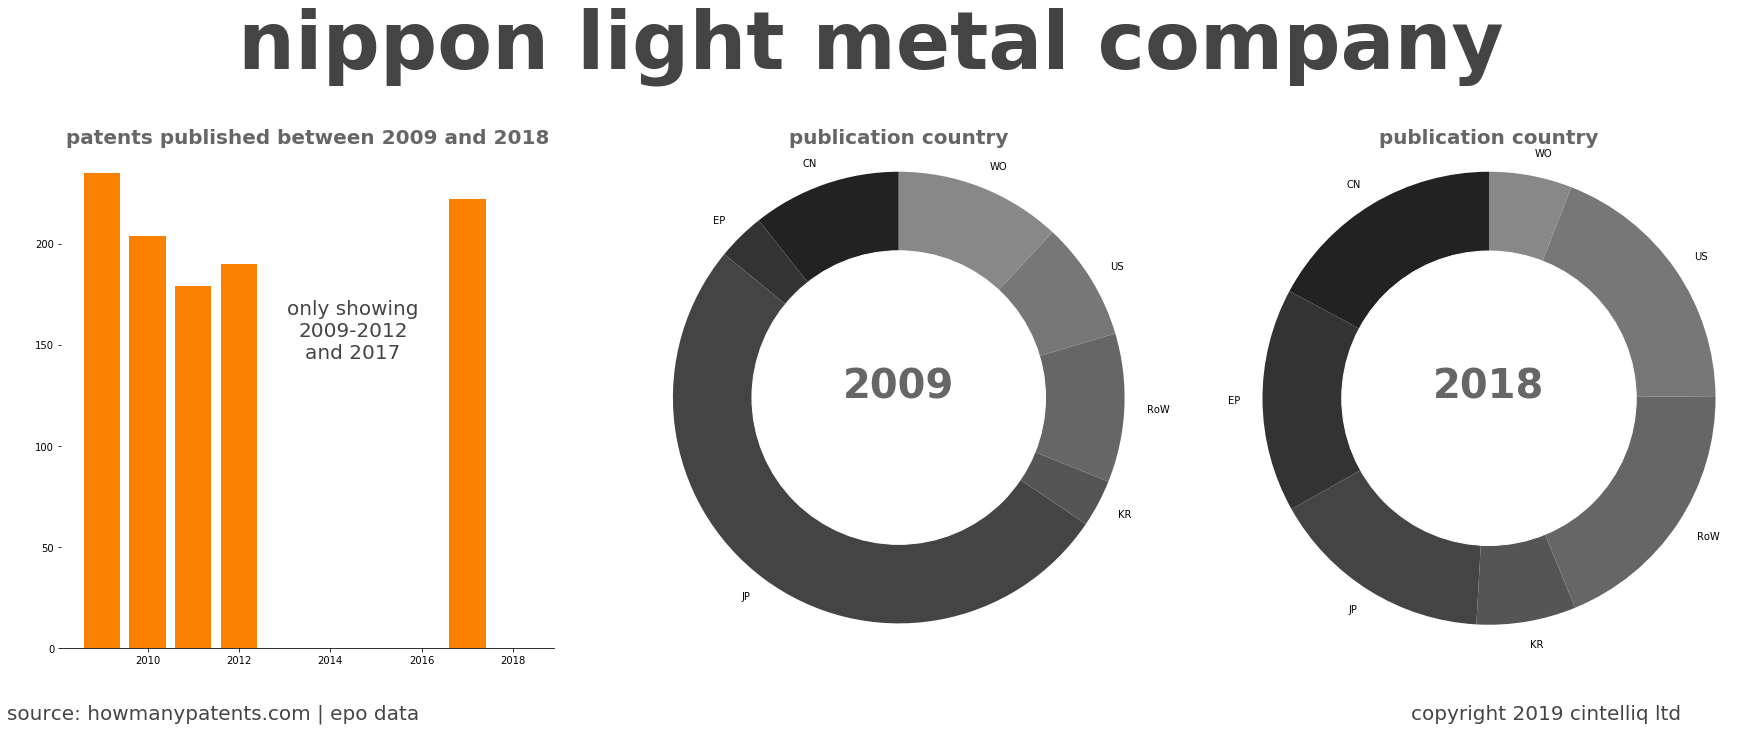 summary of patents for Nippon Light Metal Company